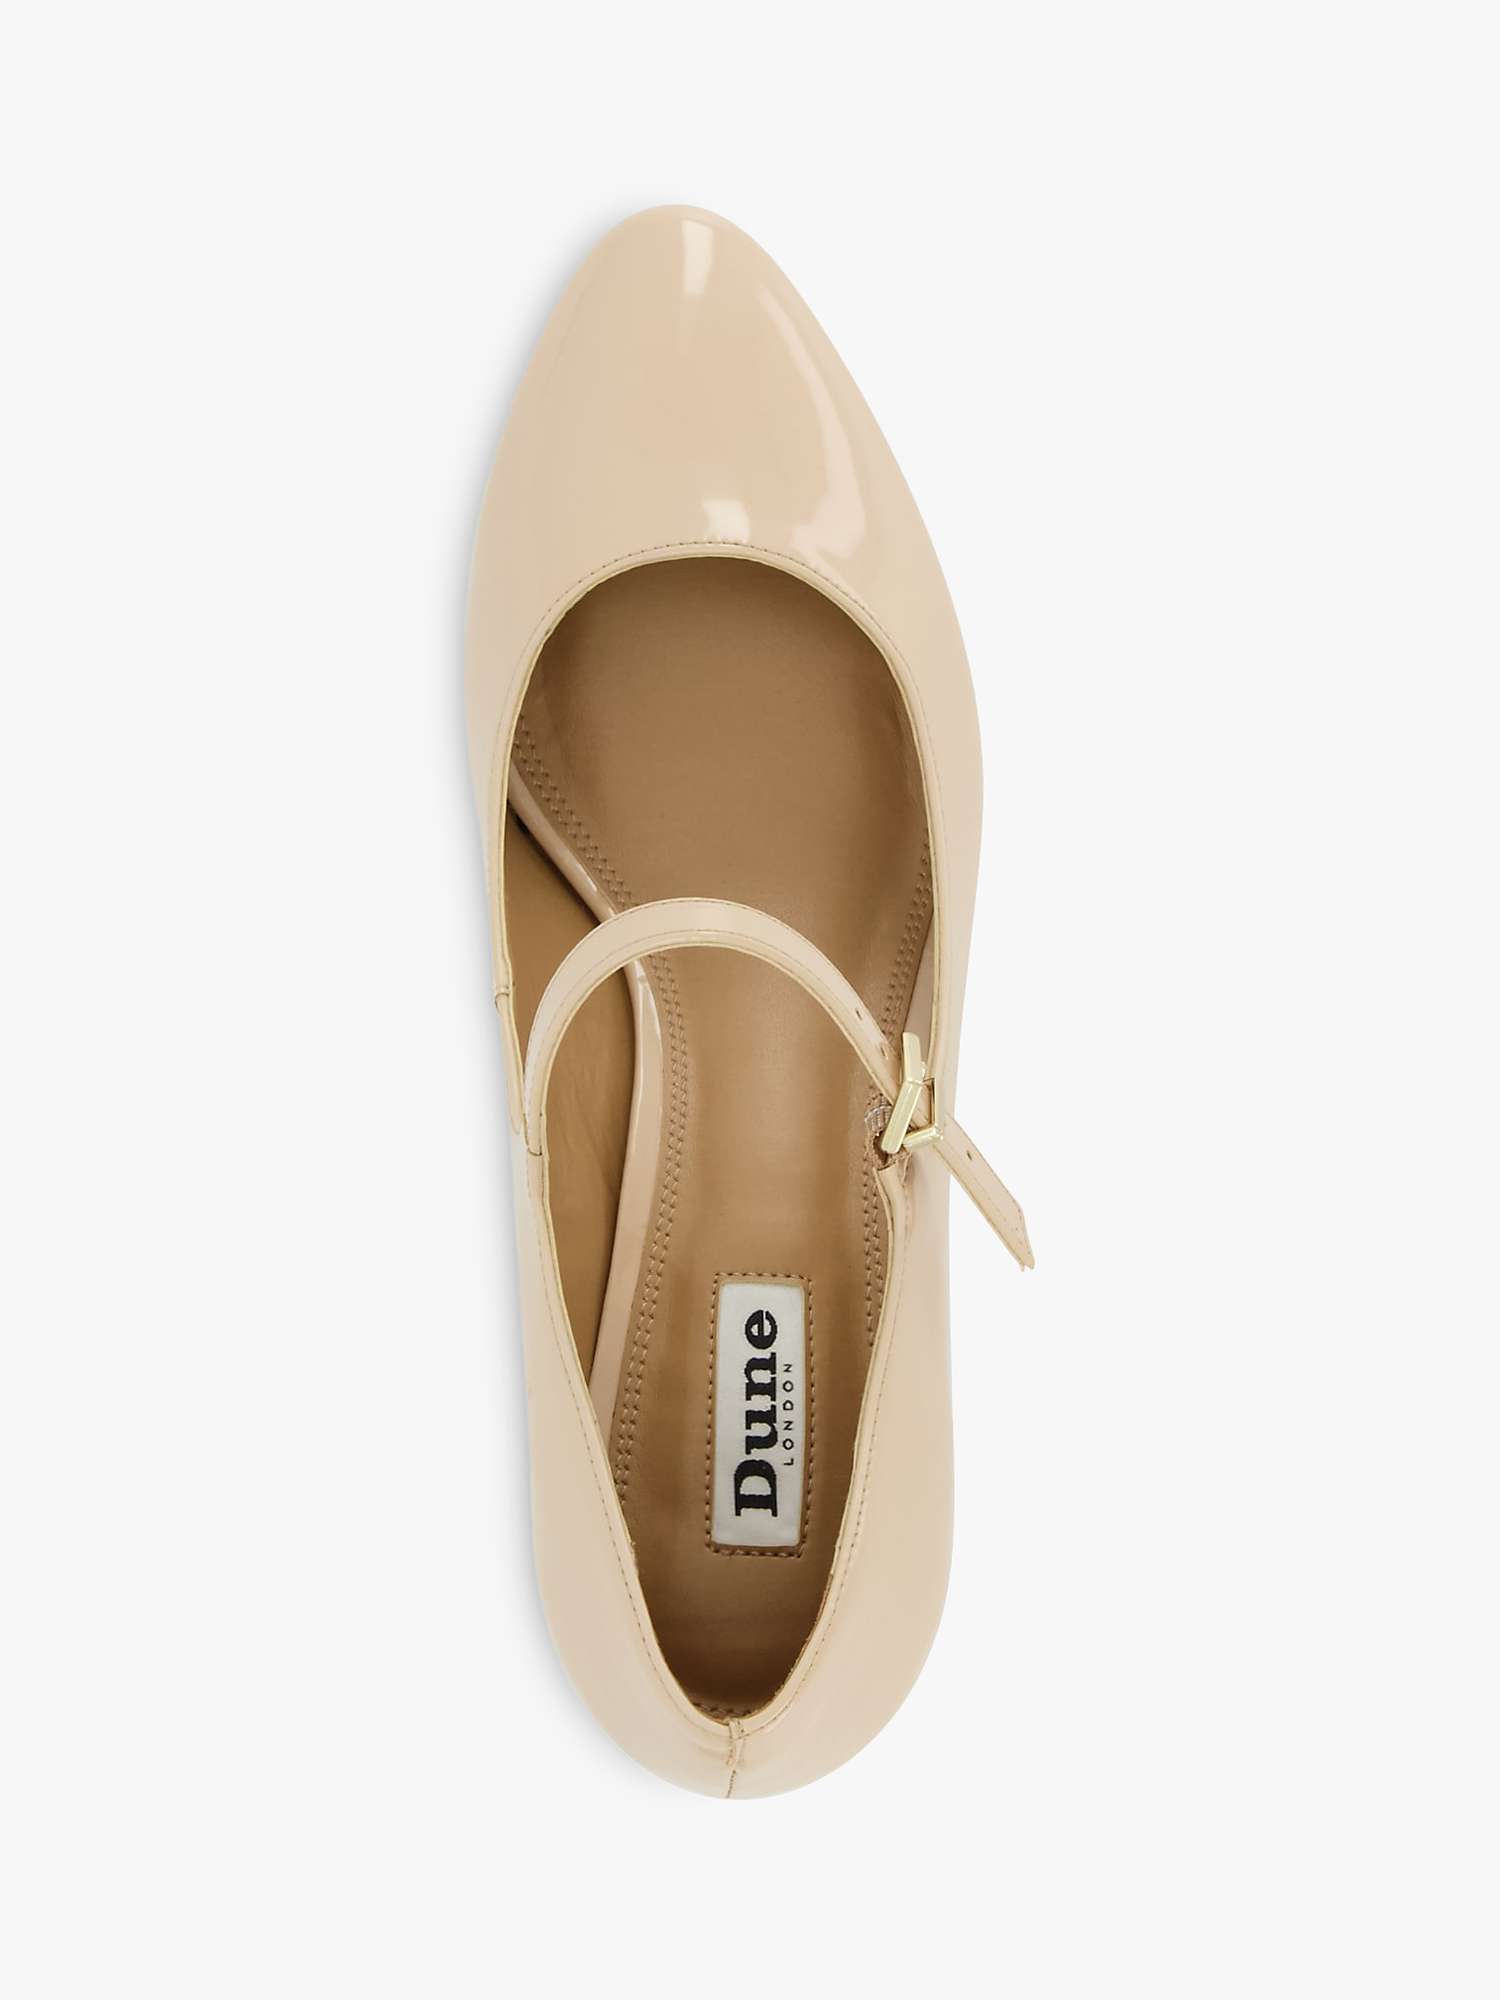 Buy Dune Alenna Patent Mary Jane Court Shoes Online at johnlewis.com